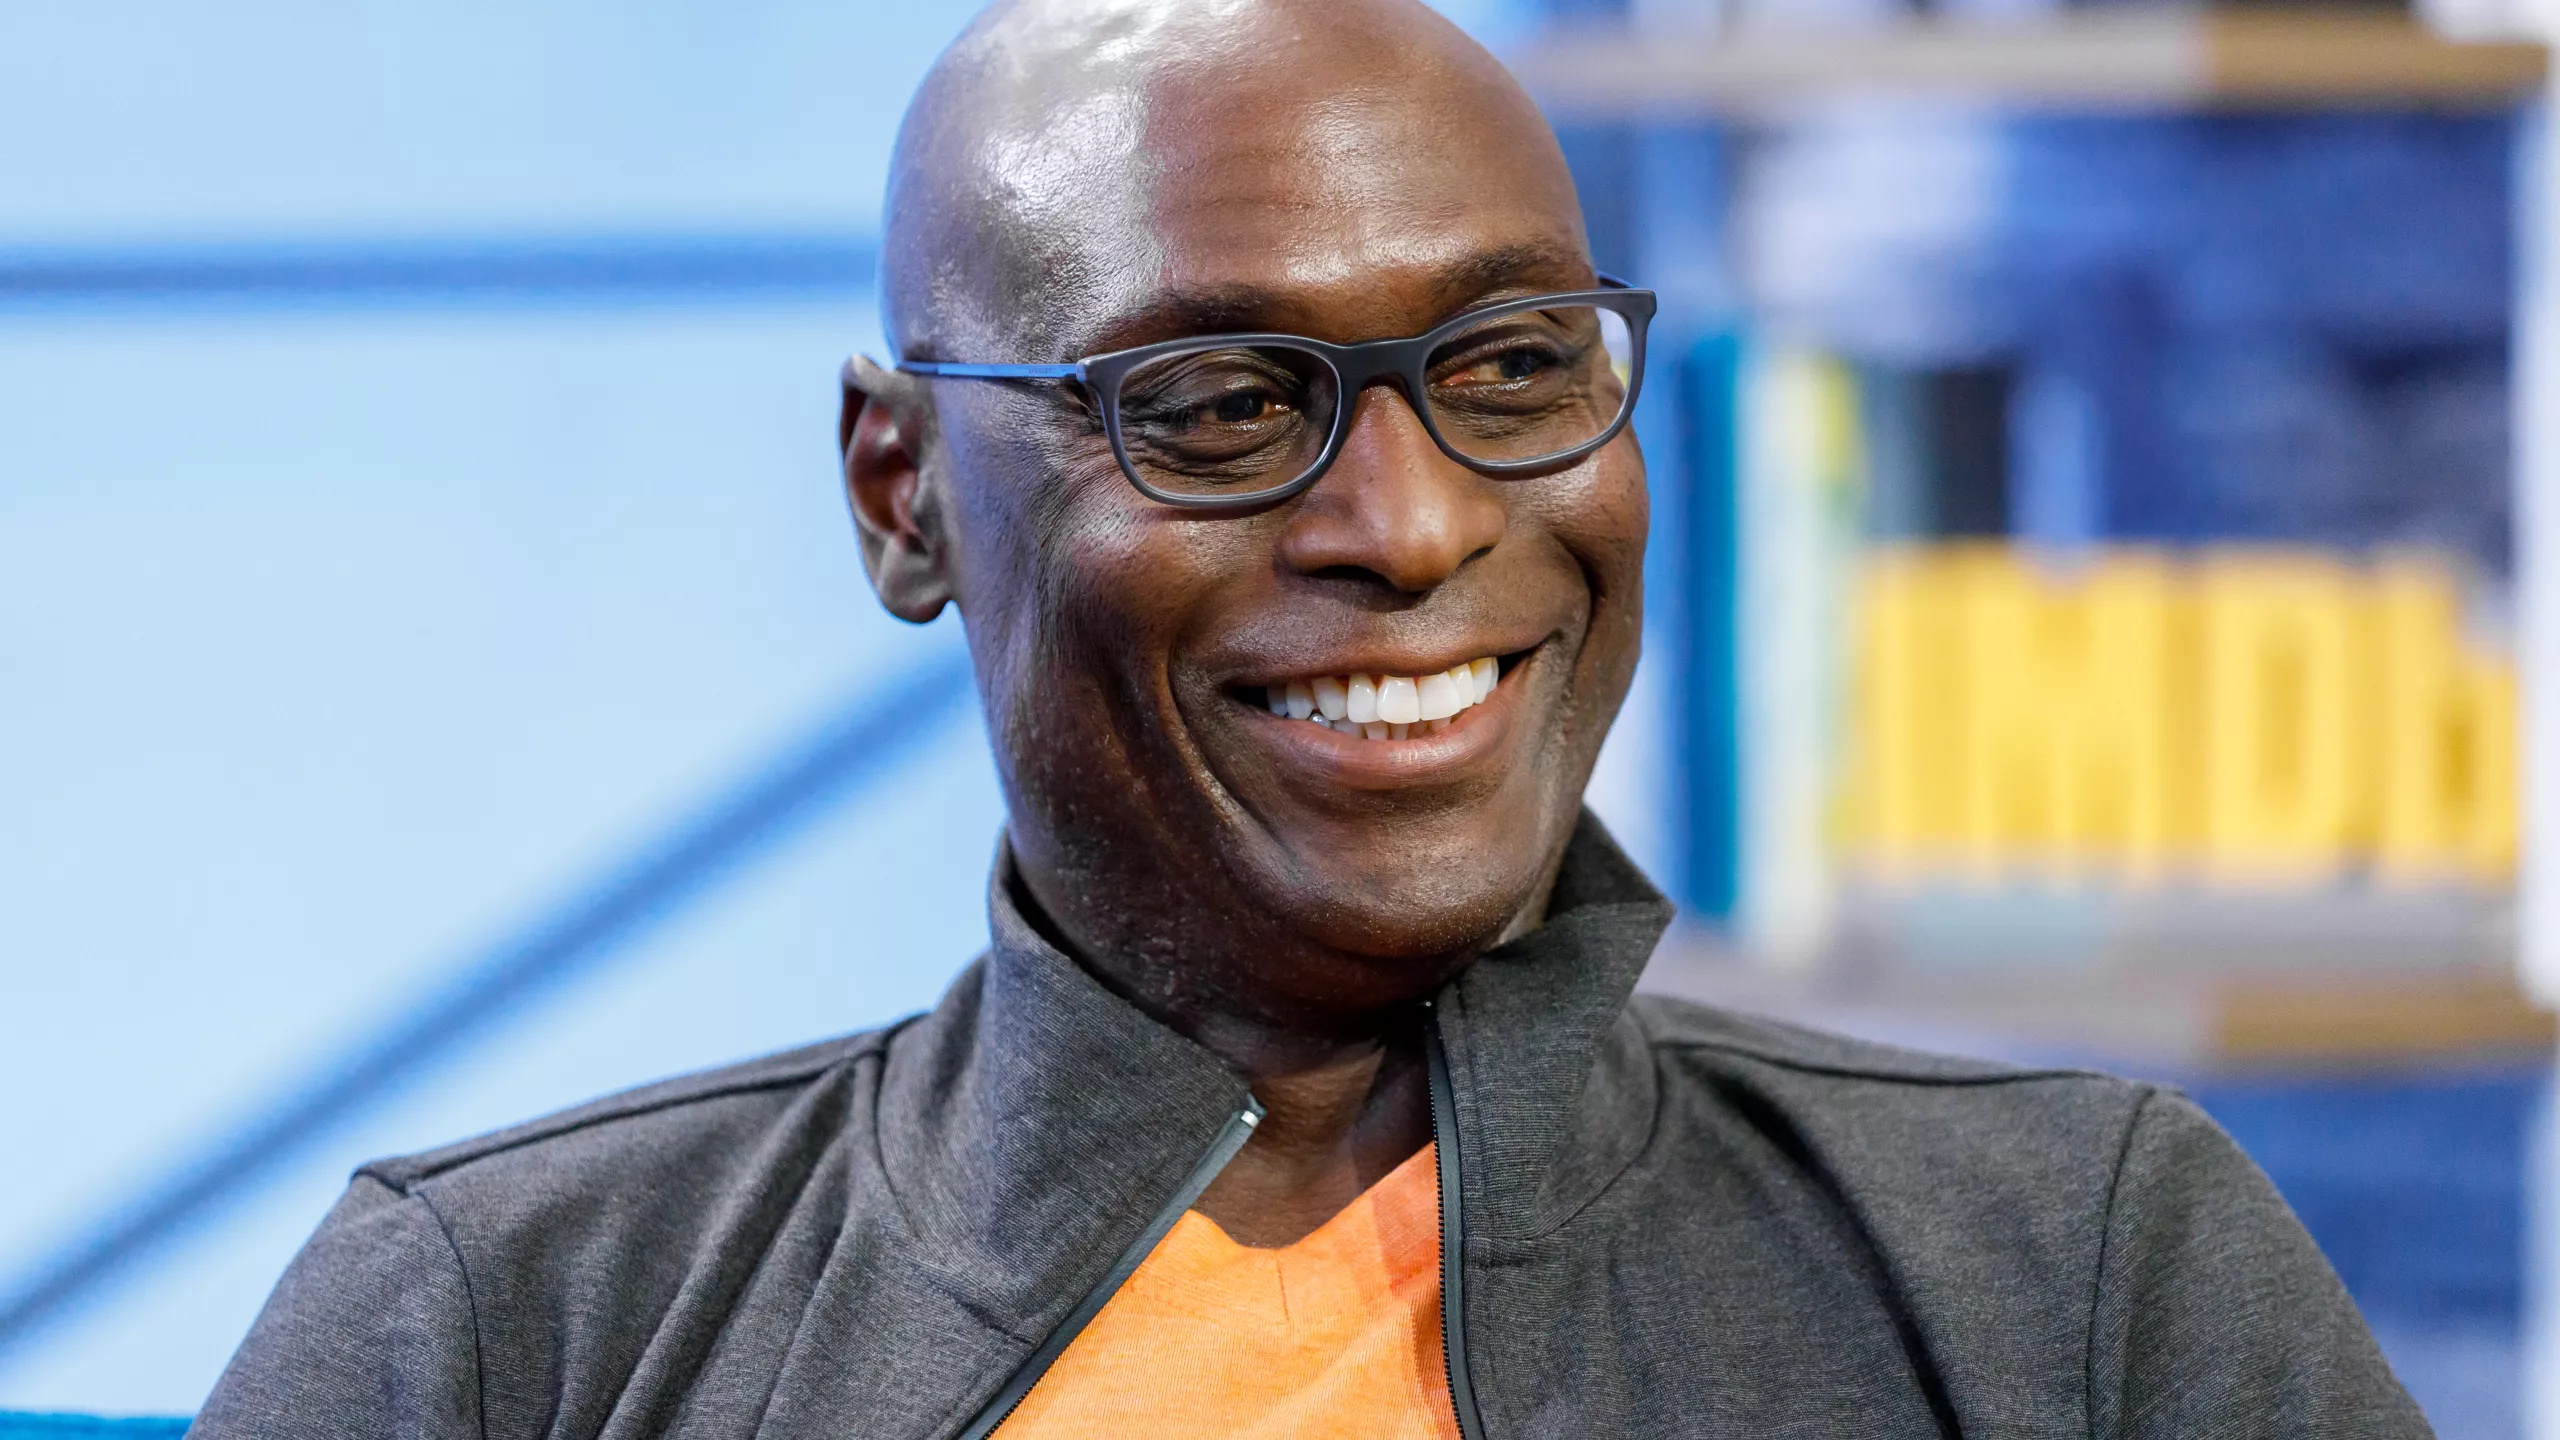 Lance Reddick, an actor from "The Wire" and "John Wick," passes away at age 60